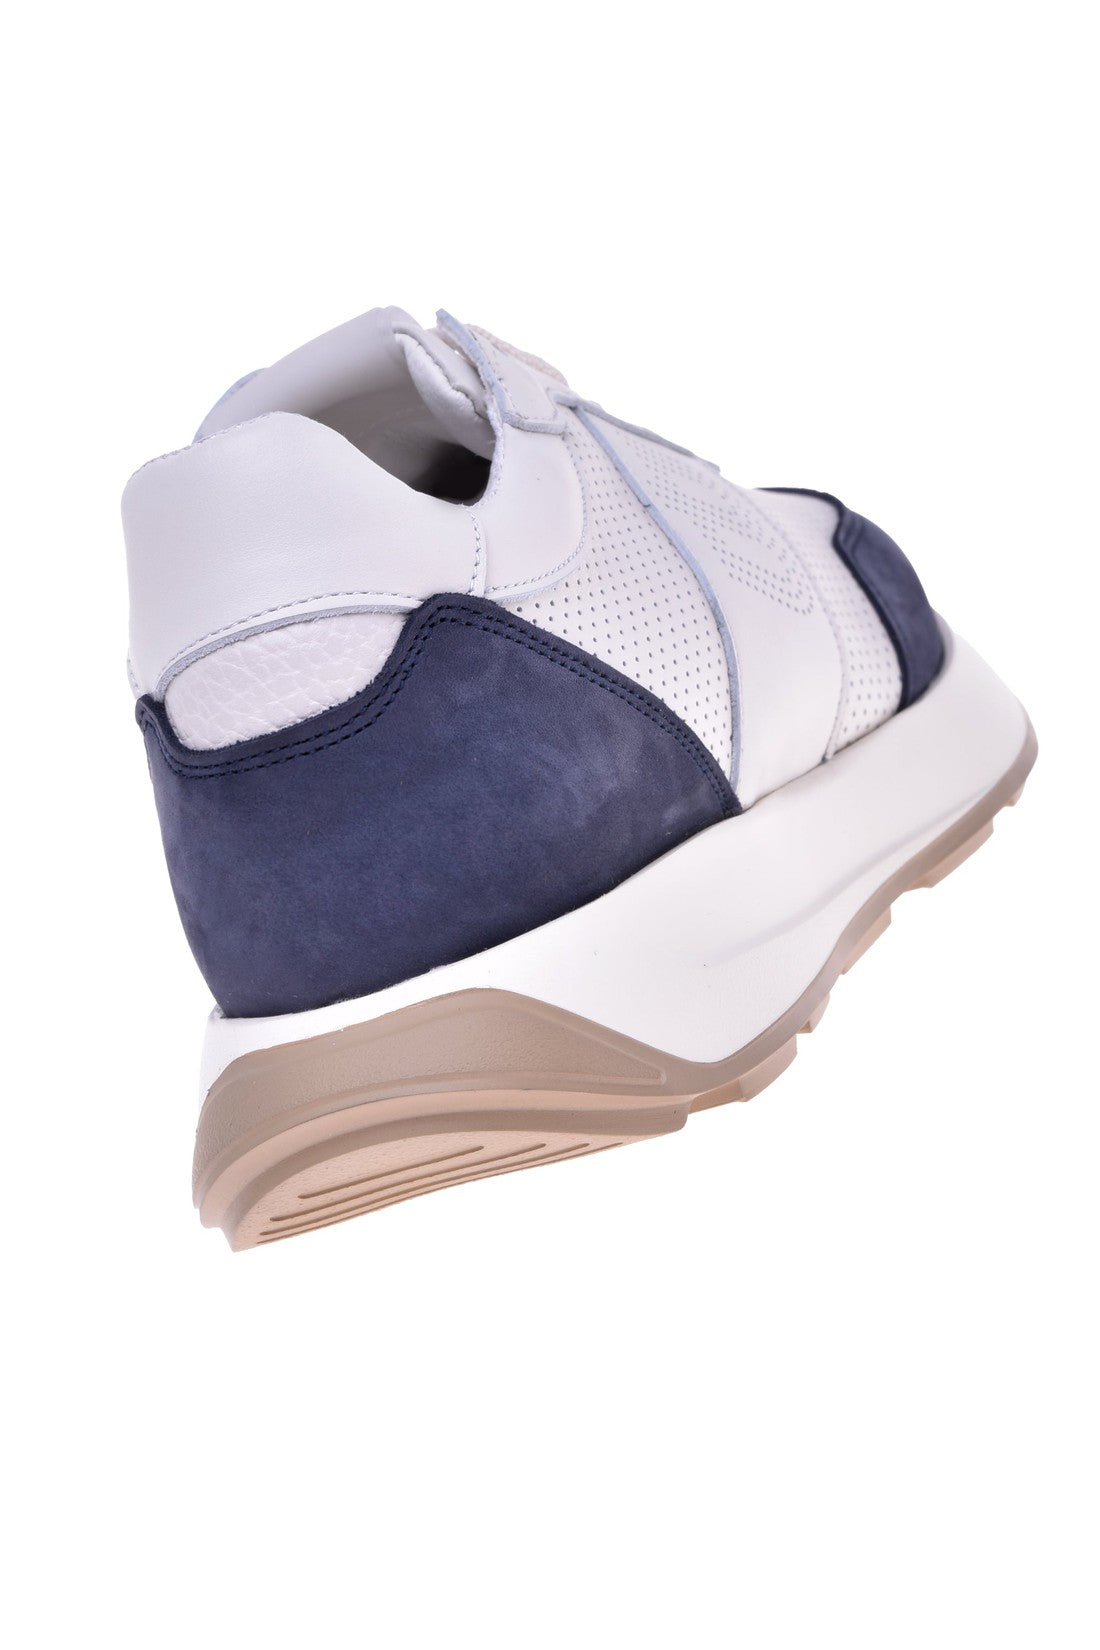 Sneaker in blue and cream perforated calfskin